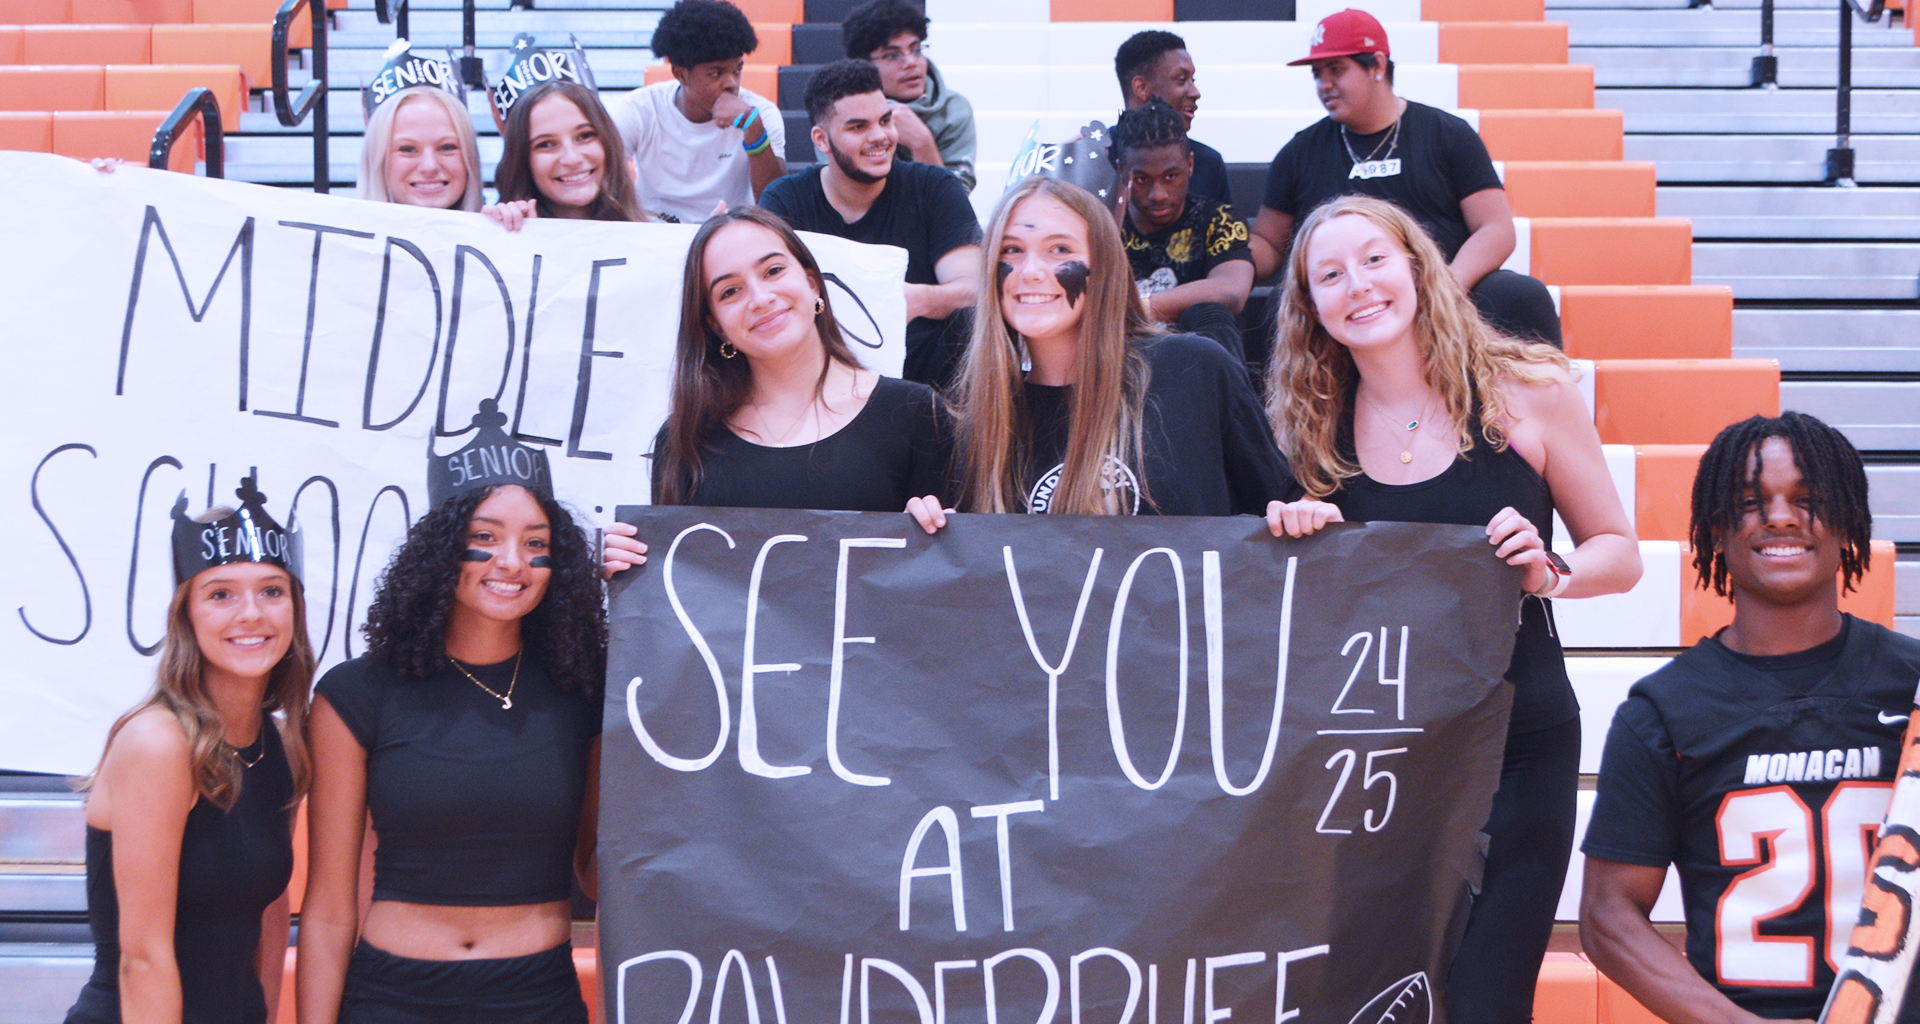 Group of students in gym pose with signs to welcome new students